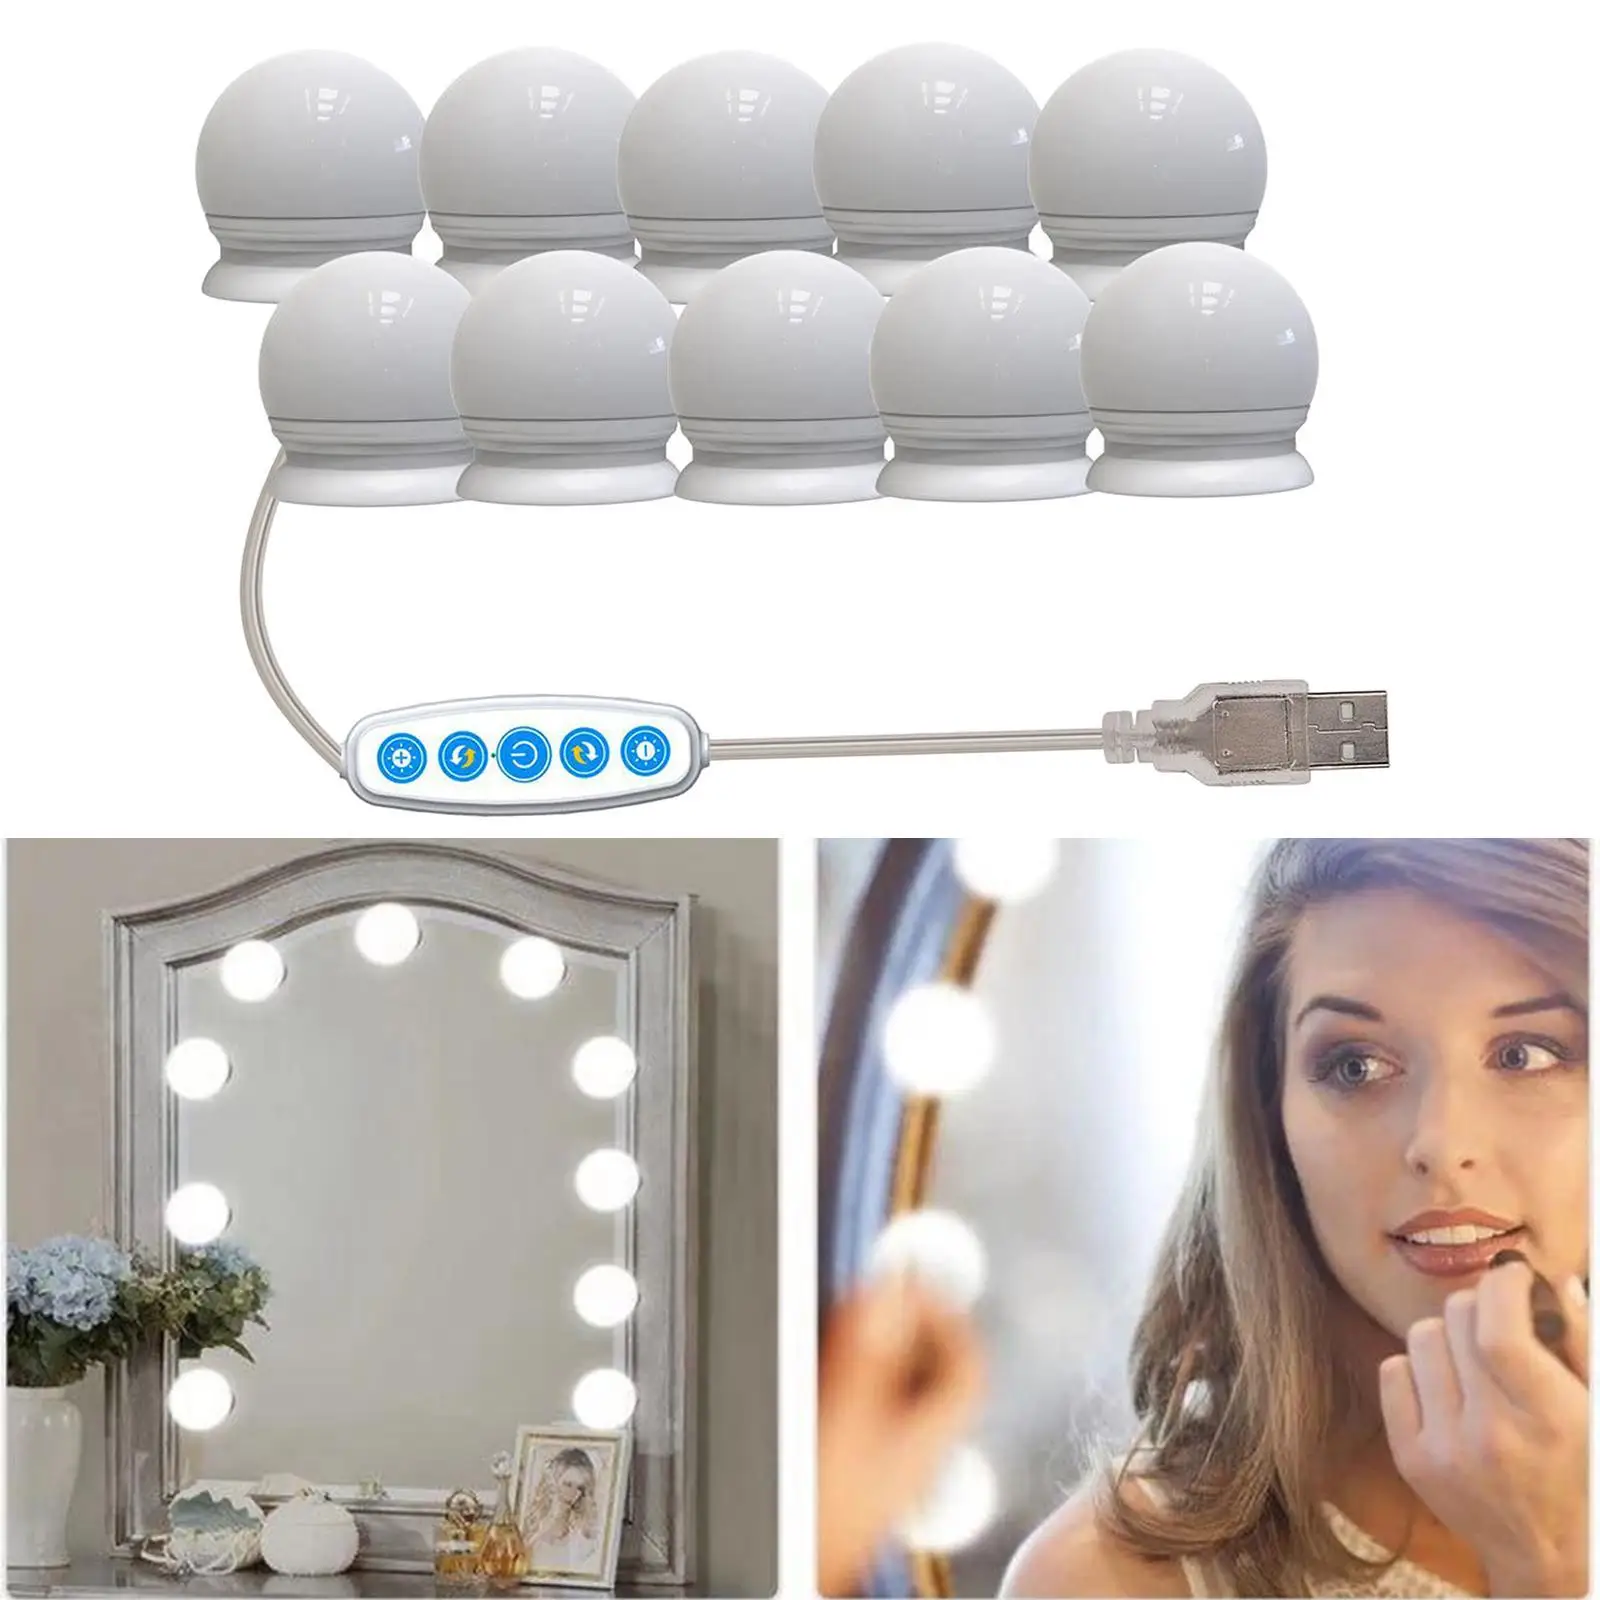   Makeup Lighted Vanity Mirror Lights 10 LED Bulbs Dimmable Tabletops